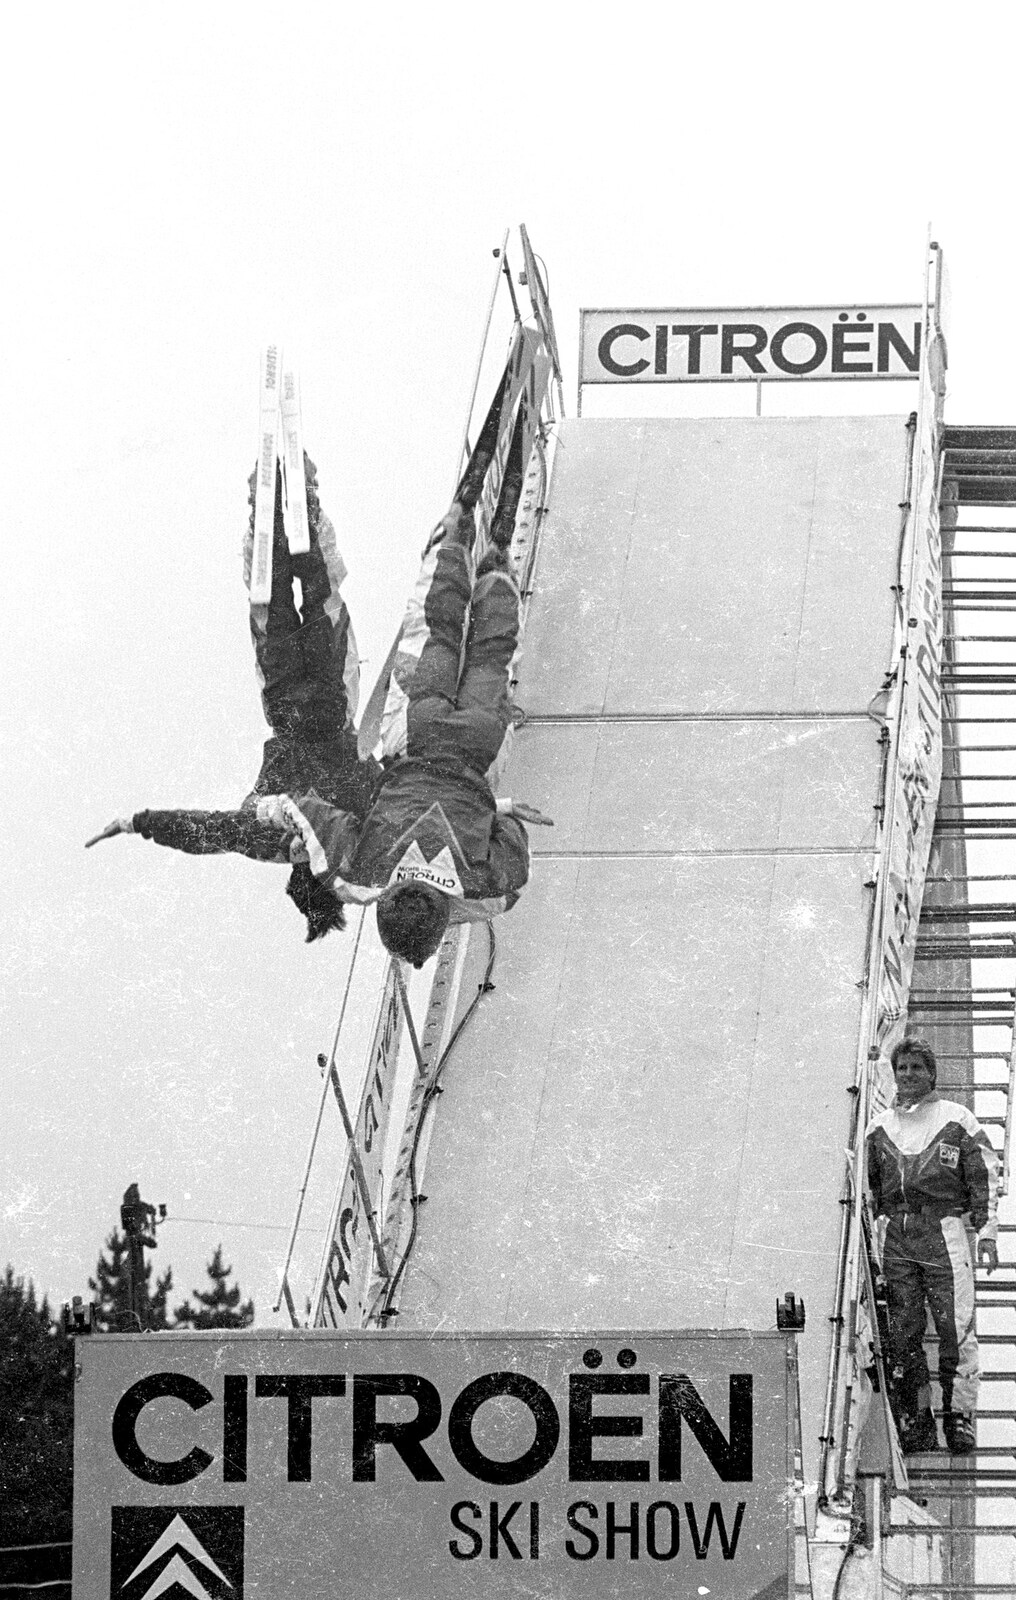 Acrobatic skiers in mid air from The Royal Norfolk Show, Costessey Showground, Norwich - June 20th 1994